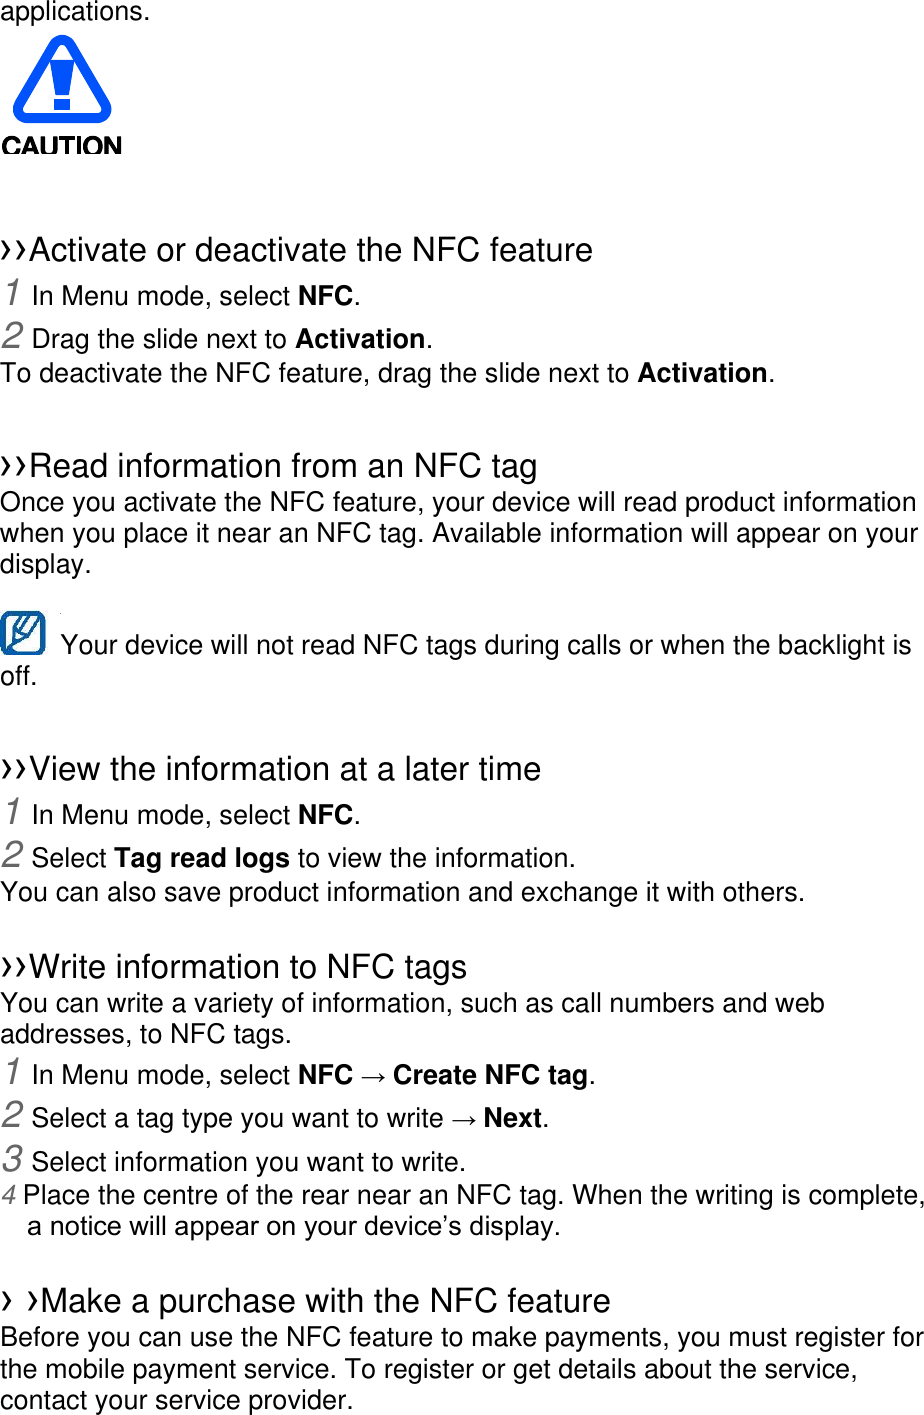 applications.    󰜁 ››Activate or deactivate the NFC feature 1 In Menu mode, select NFC. 2 Drag the slide next to Activation. To deactivate the NFC feature, drag the slide next to Activation.  ››Read information from an NFC tag Once you activate the NFC feature, your device will read product information when you place it near an NFC tag. Available information will appear on your display.  Your device will not read NFC tags during calls or when the backlight is   off.  ››View the information at a later time 1 In Menu mode, select NFC. 2 Select Tag read logs to view the information. You can also save product information and exchange it with others.  ››Write information to NFC tags   You can write a variety of information, such as call numbers and web addresses, to NFC tags. 1 In Menu mode, select NFC → Create NFC tag. 2 Select a tag type you want to write → Next. 3 Select information you want to write. 4 Place the centre of the rear near an NFC tag. When the writing is complete, a notice will appear on your device’s display.  › ›Make a purchase with the NFC feature   Before you can use the NFC feature to make payments, you must register for the mobile payment service. To register or get details about the service, contact your service provider. 